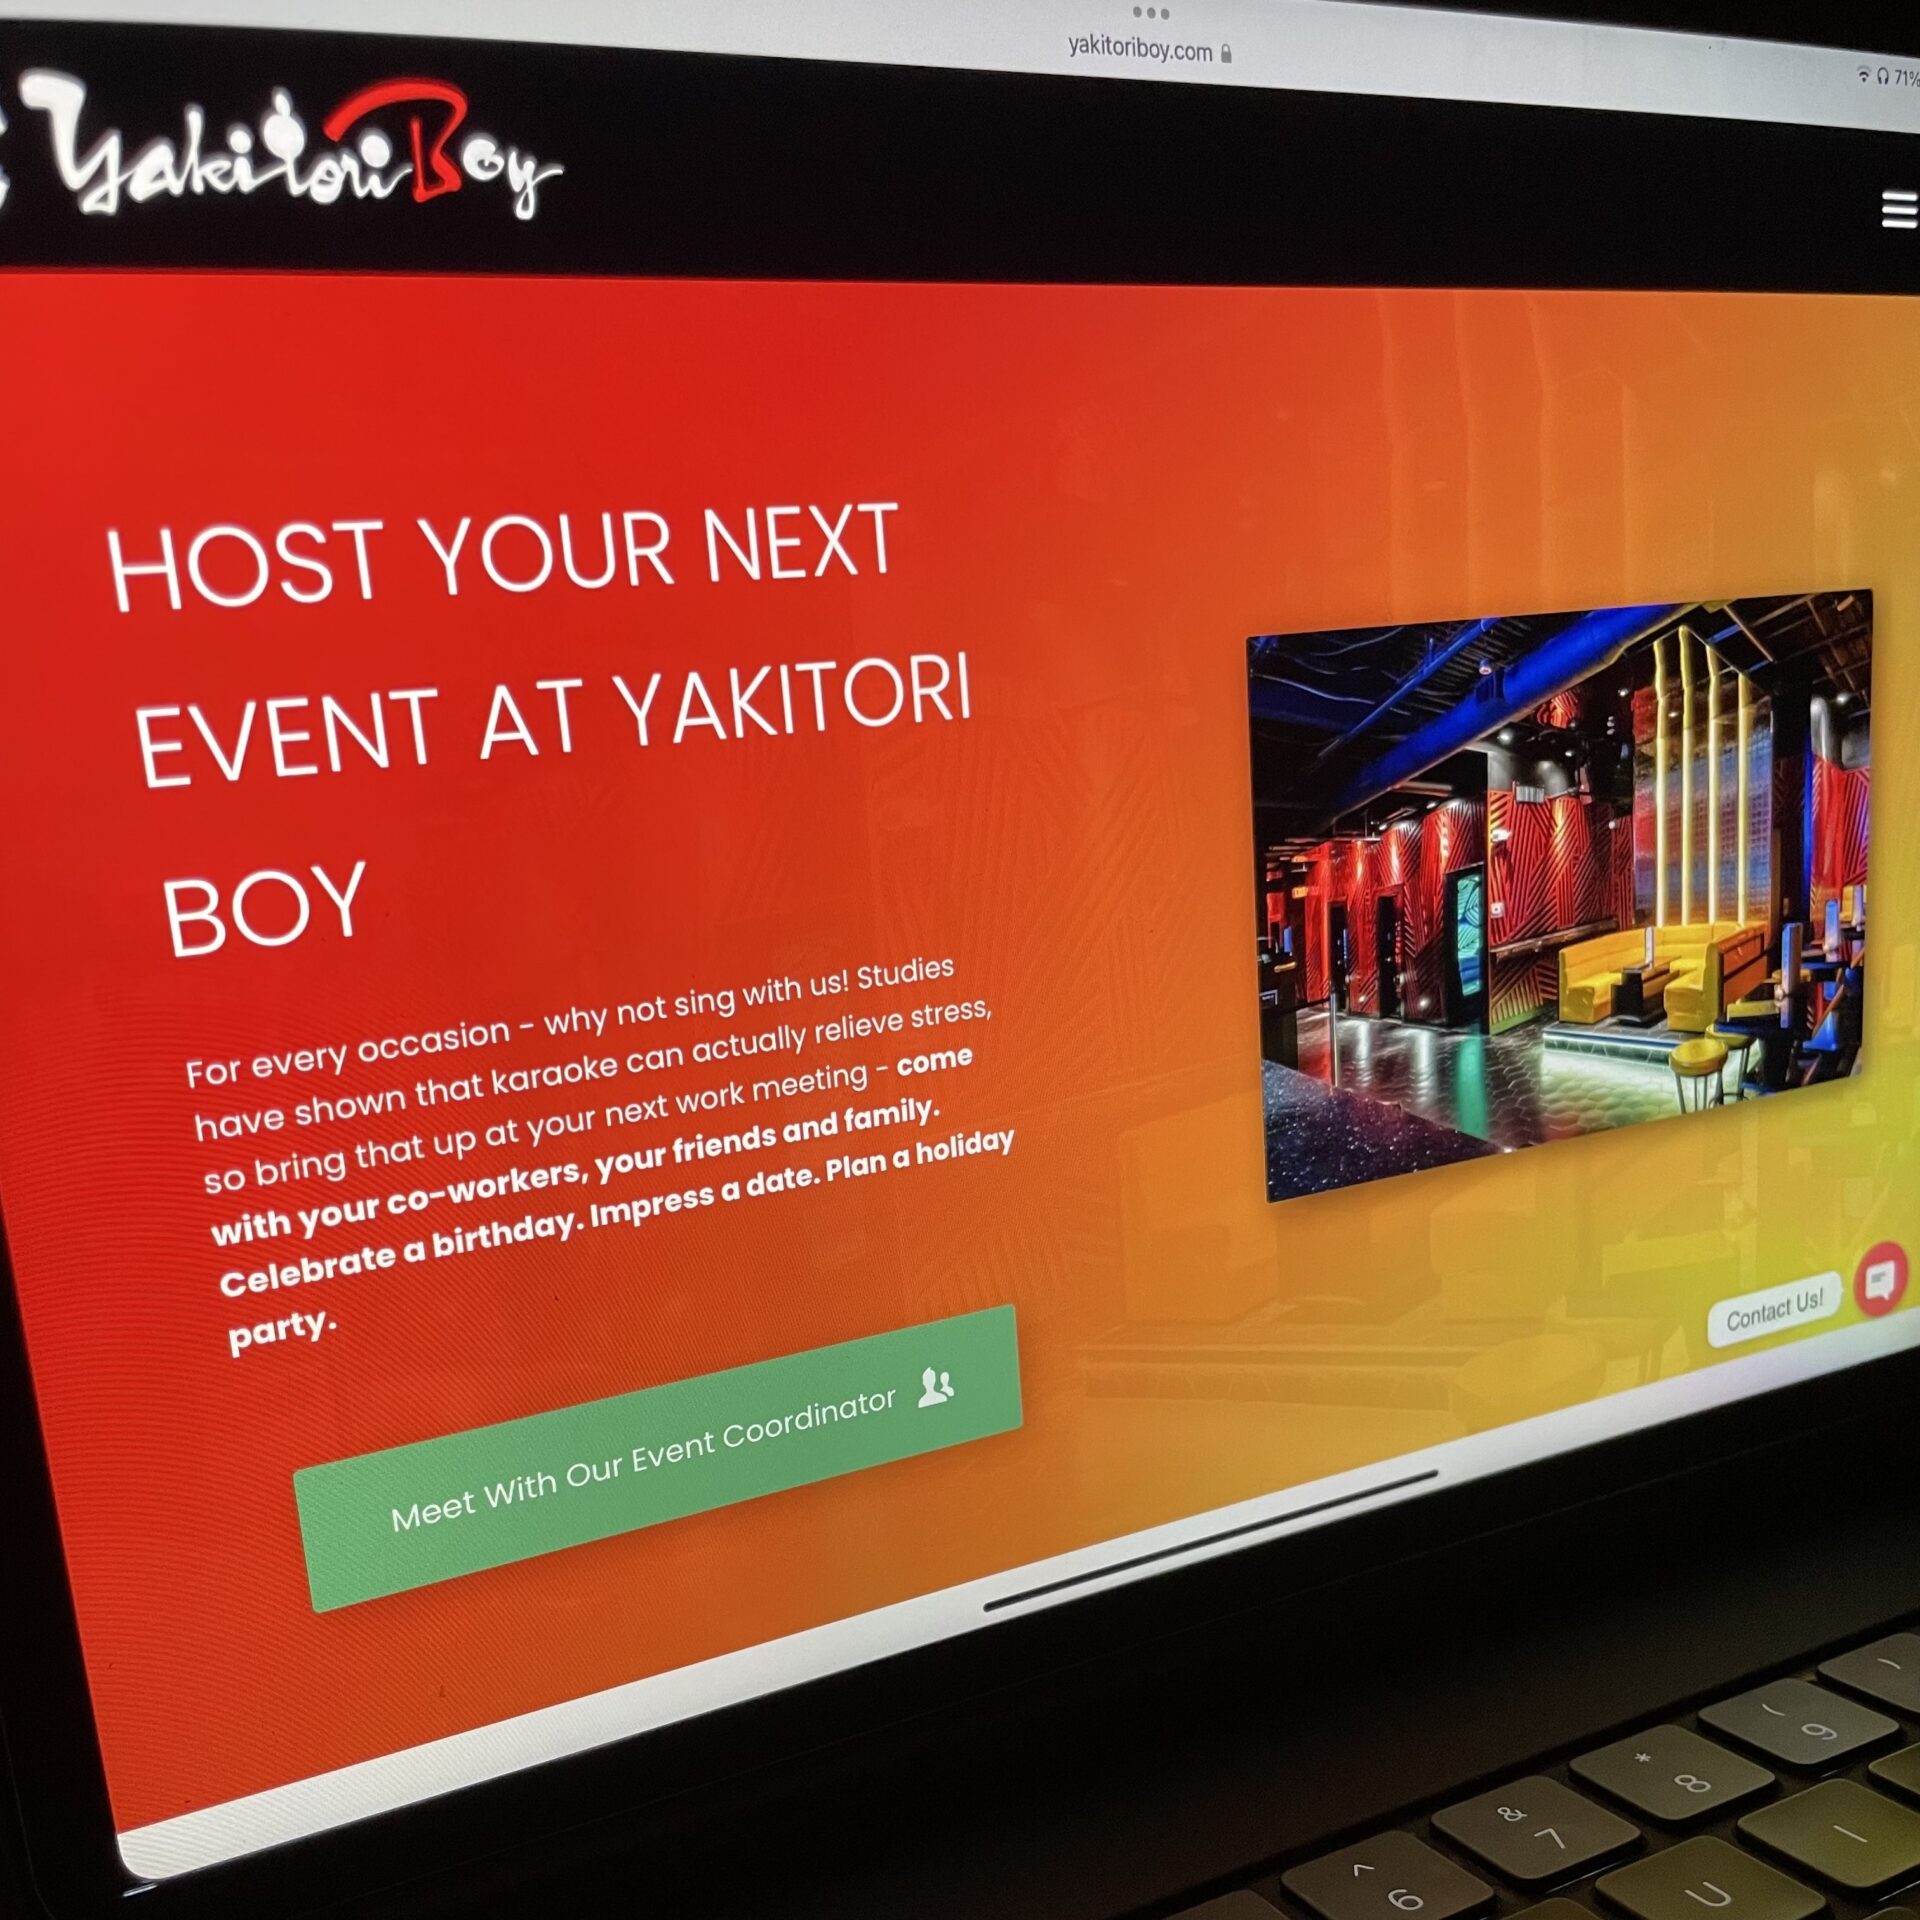 What's New, Current Events - Yakitori Boy